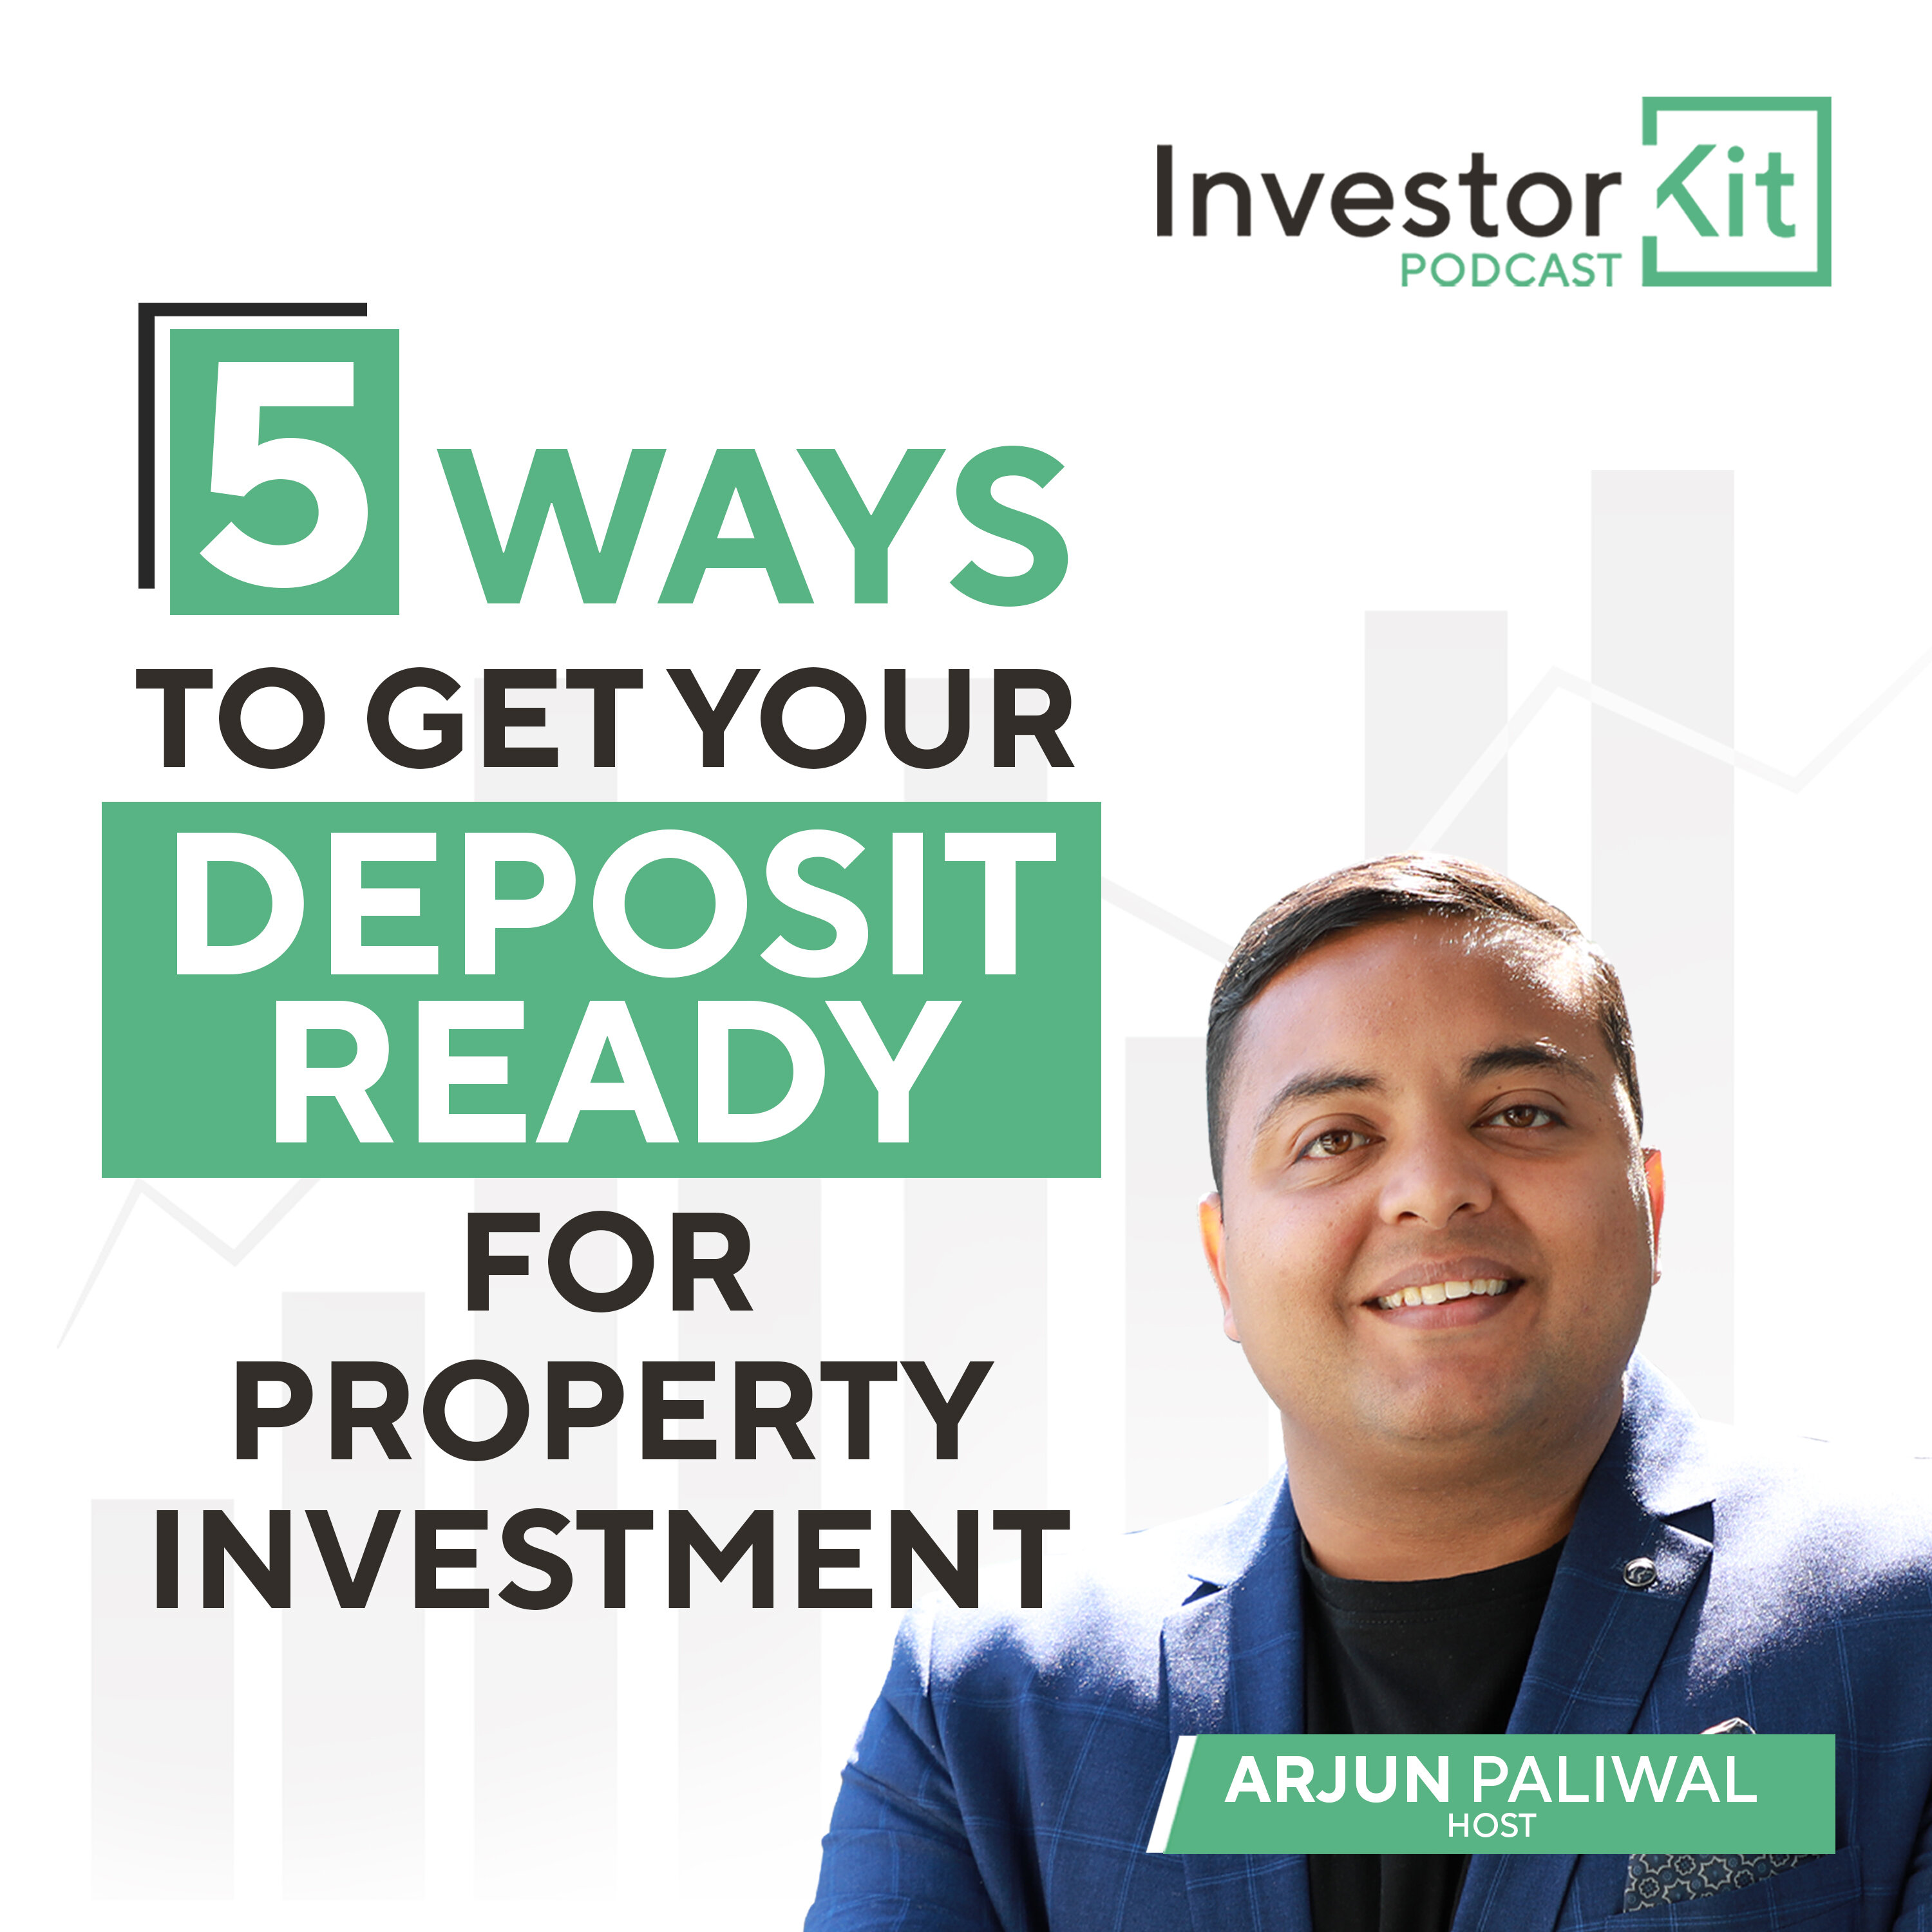 5 Ways To Get Your Deposit Ready For Property Investment